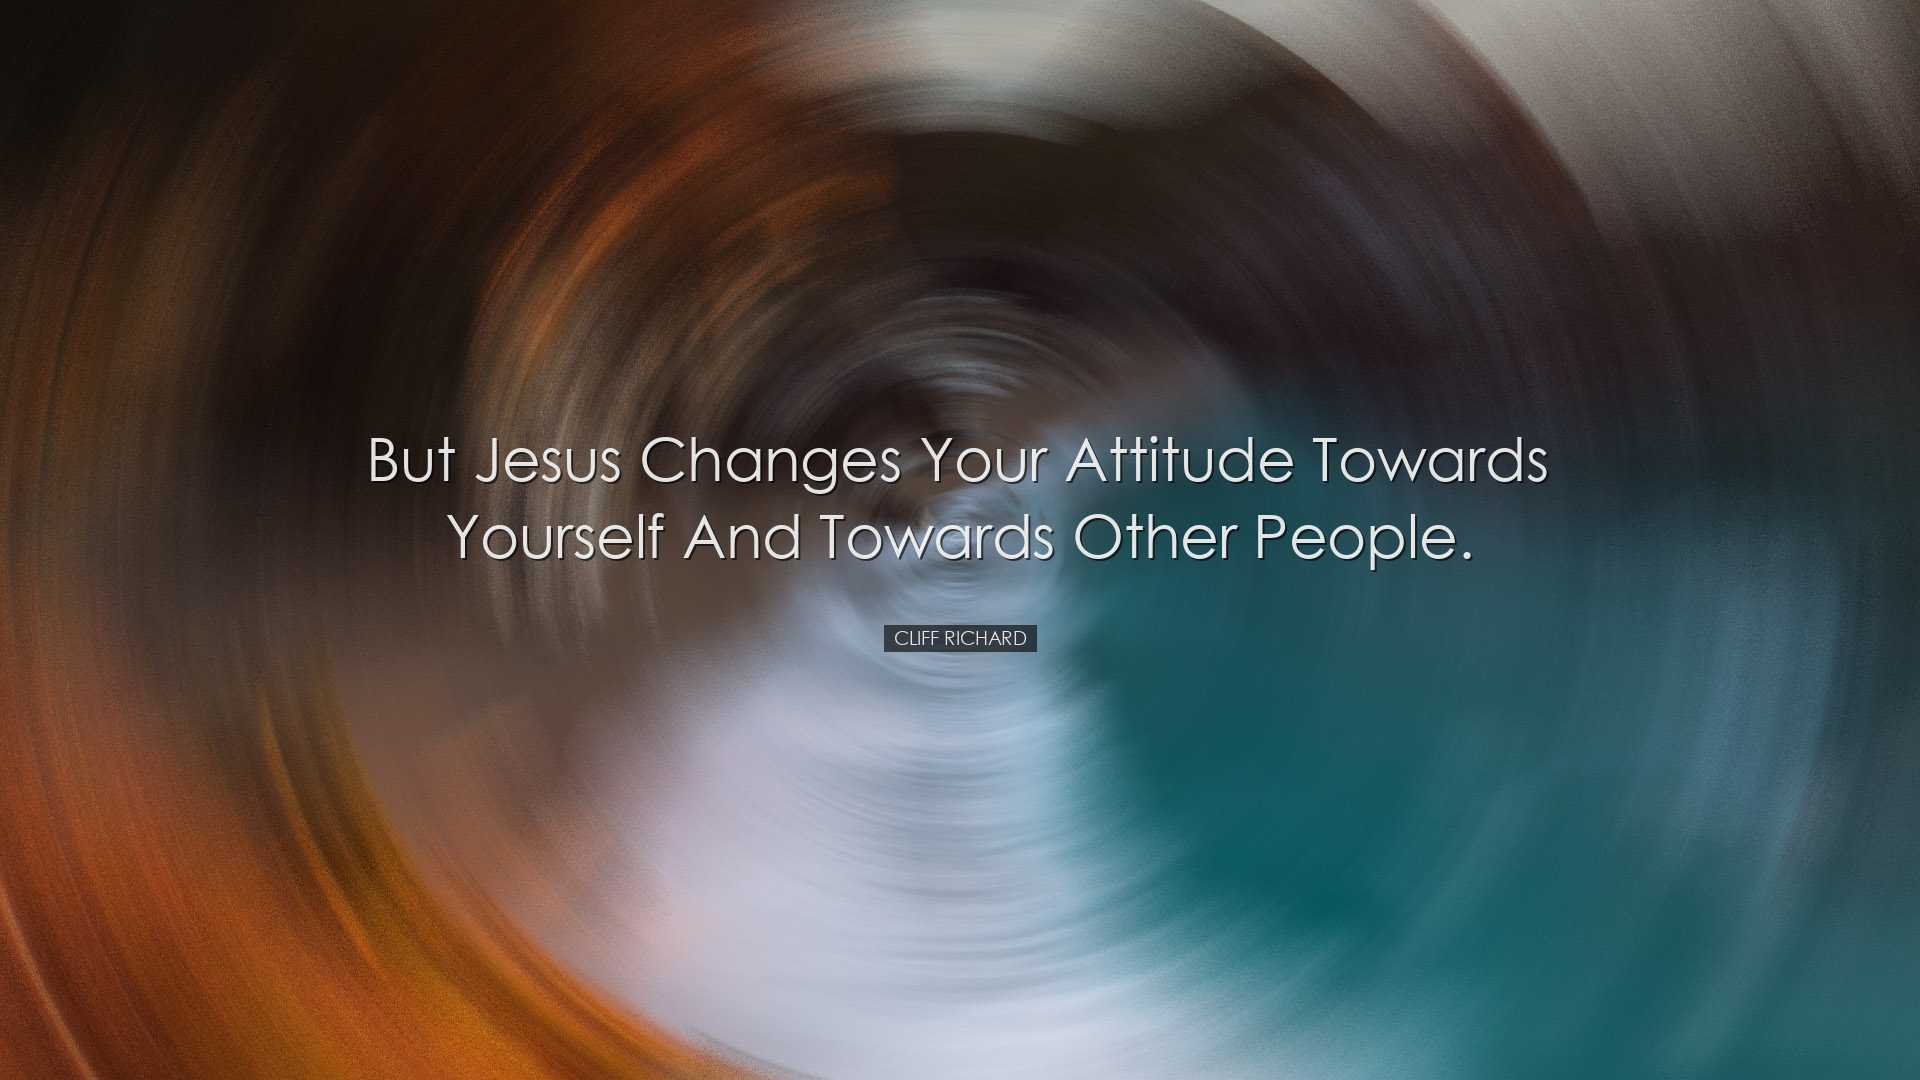 But Jesus changes your attitude towards yourself and towards other